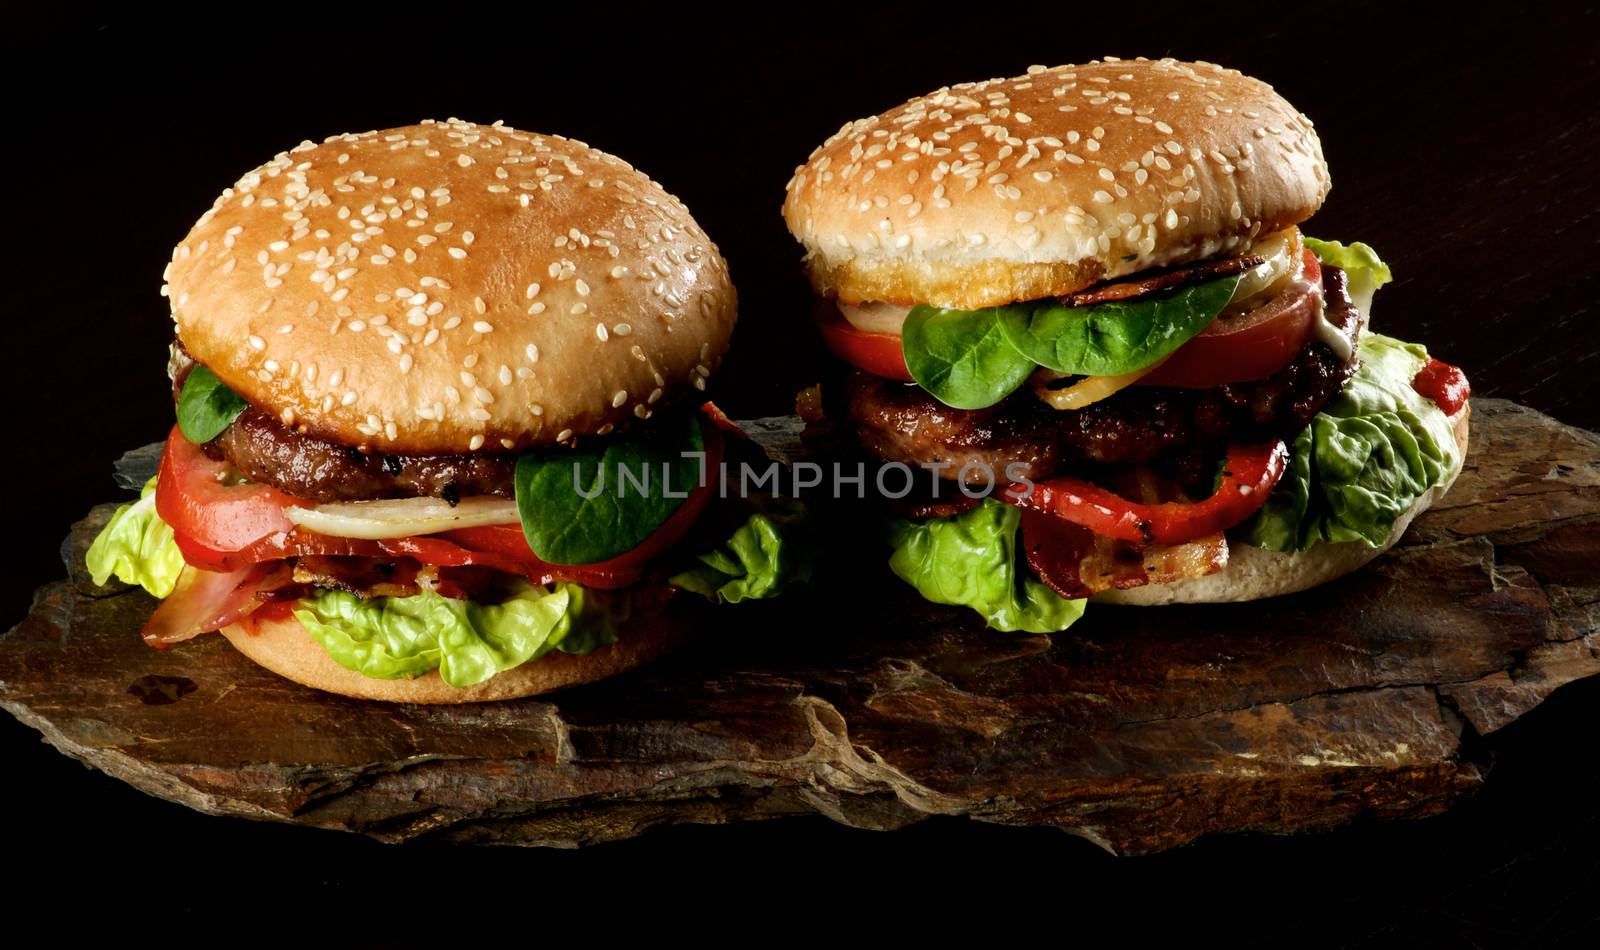 Two Tasty Hamburgers with Beef, Bacon, Lettuce, Tomatoes, Basil, Roasted Onion and Juicy Sauce on Sesame Buns on Stone Board closeup on Dark background